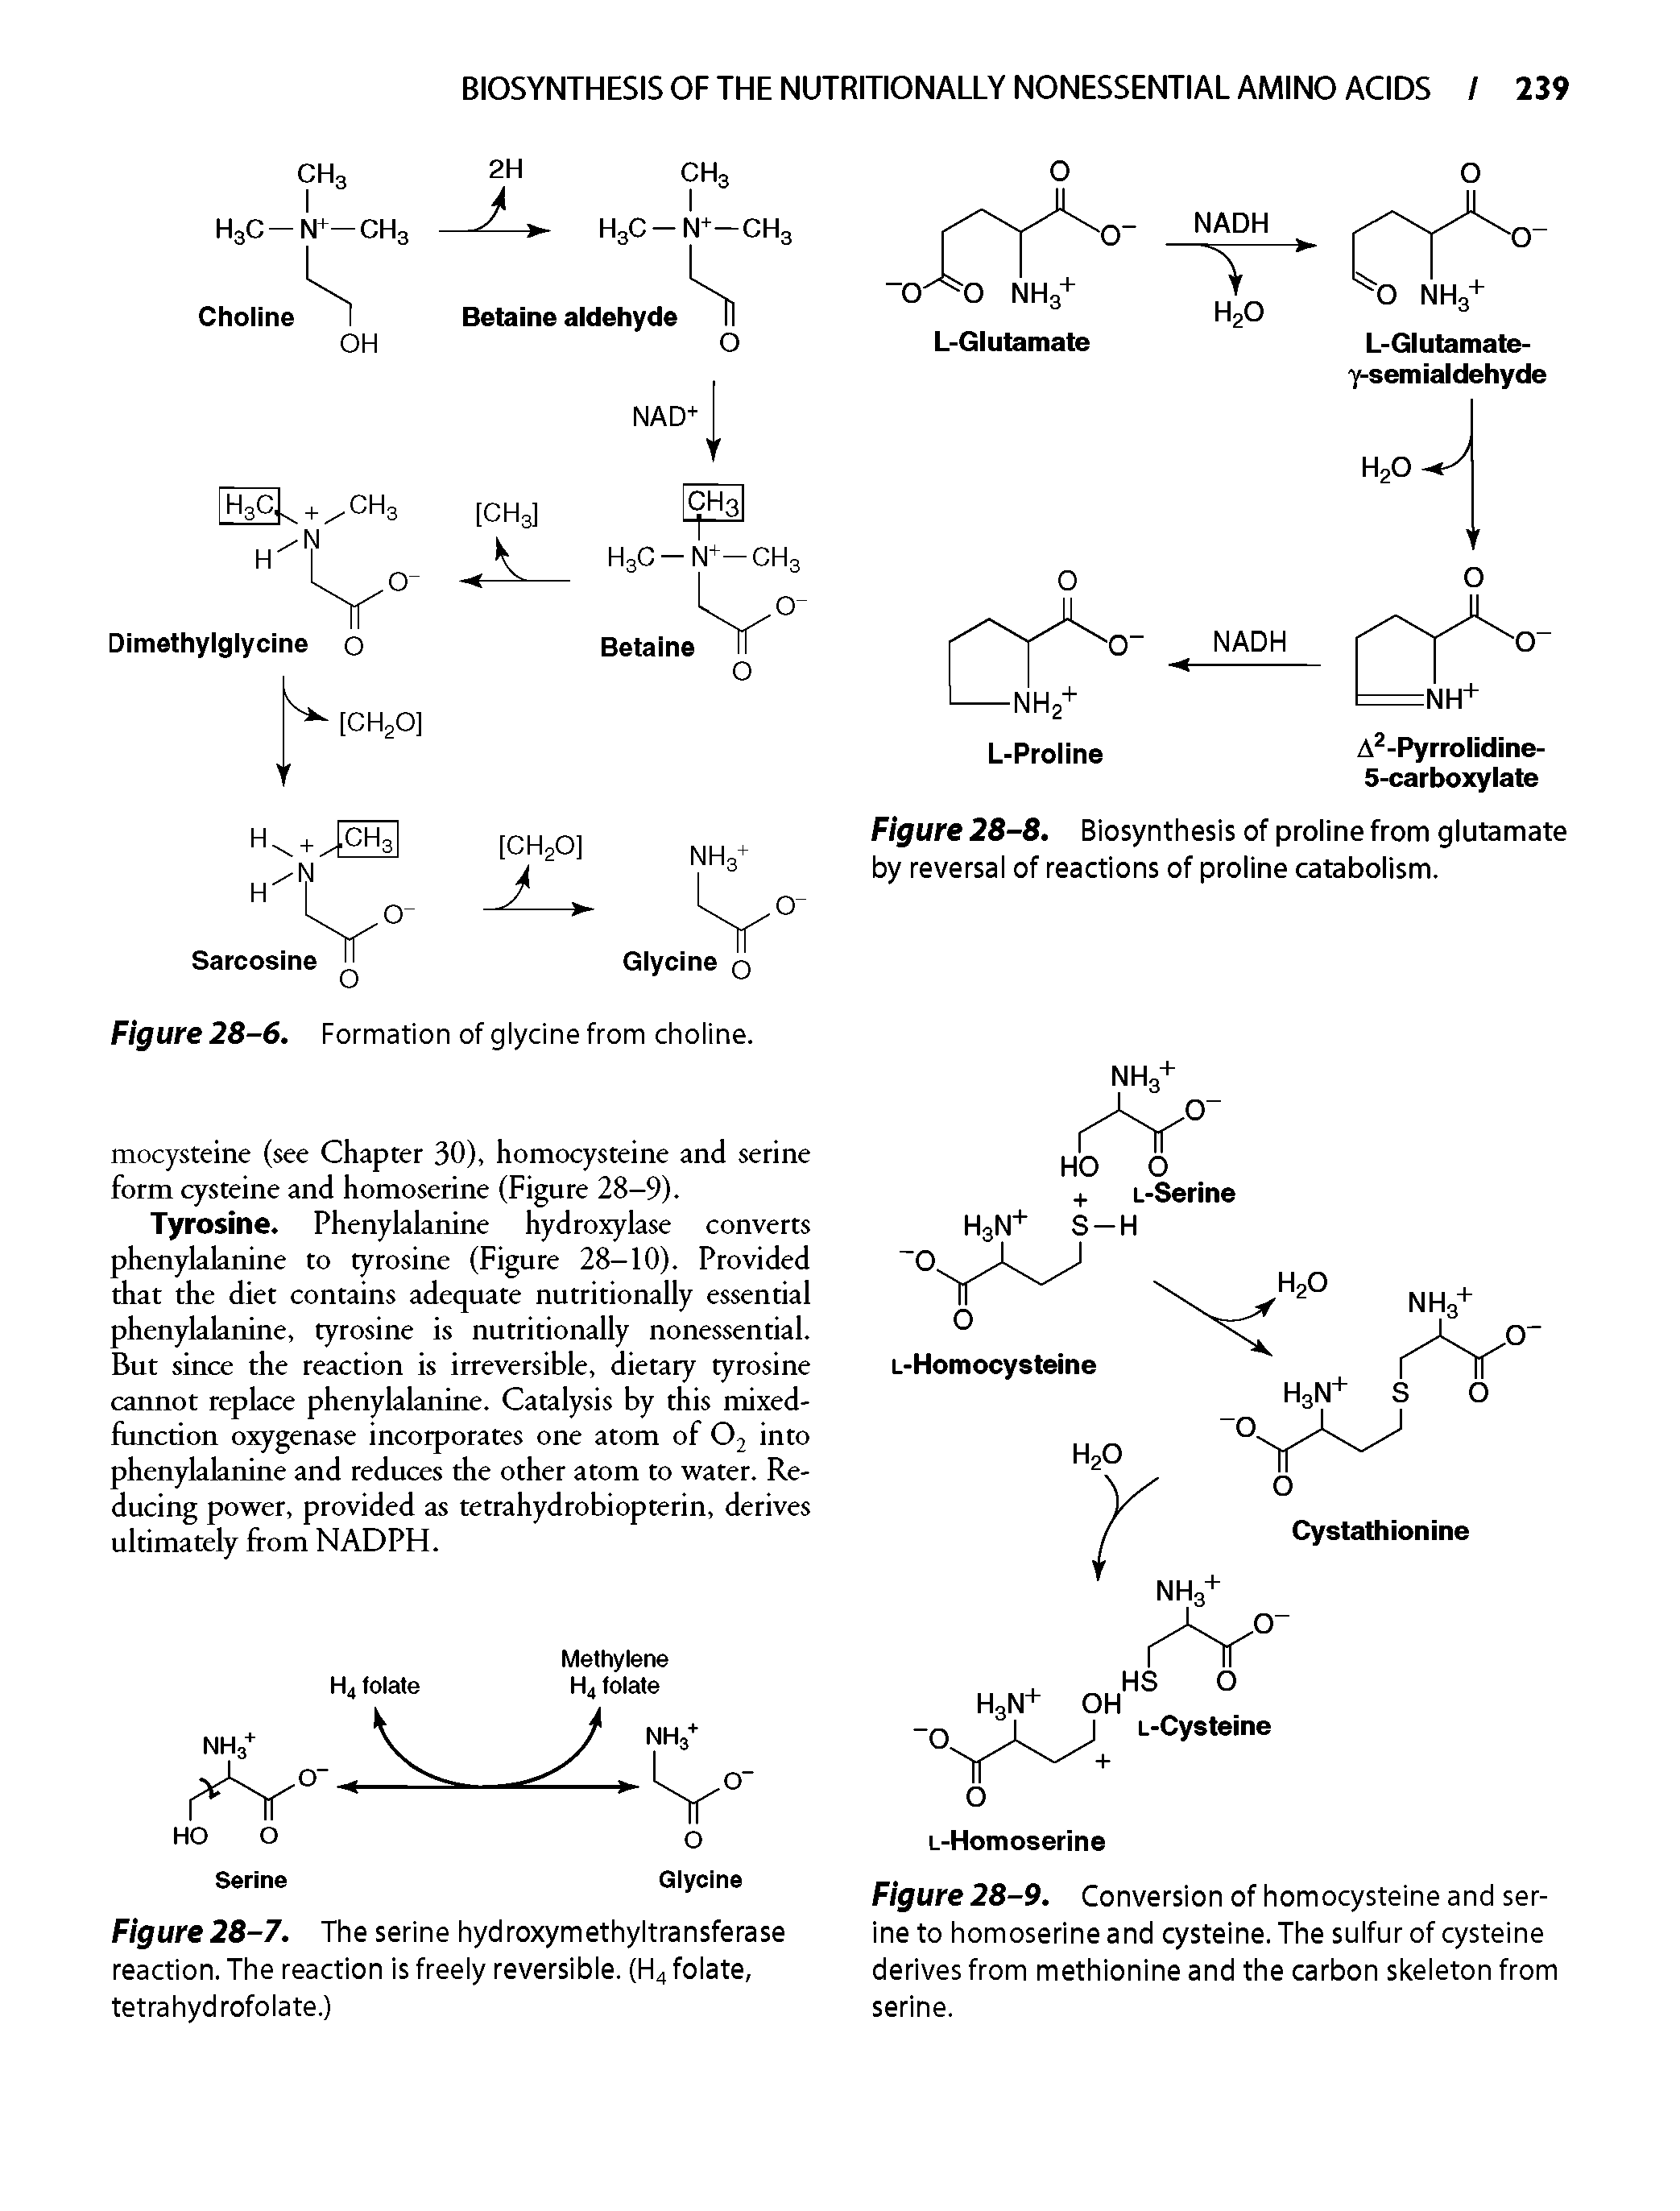 Figure 28-9. Conversion of homocysteine and serine to homoserine and cysteine. The sulfur of cysteine derives from methionine and the carbon skeleton from serine.